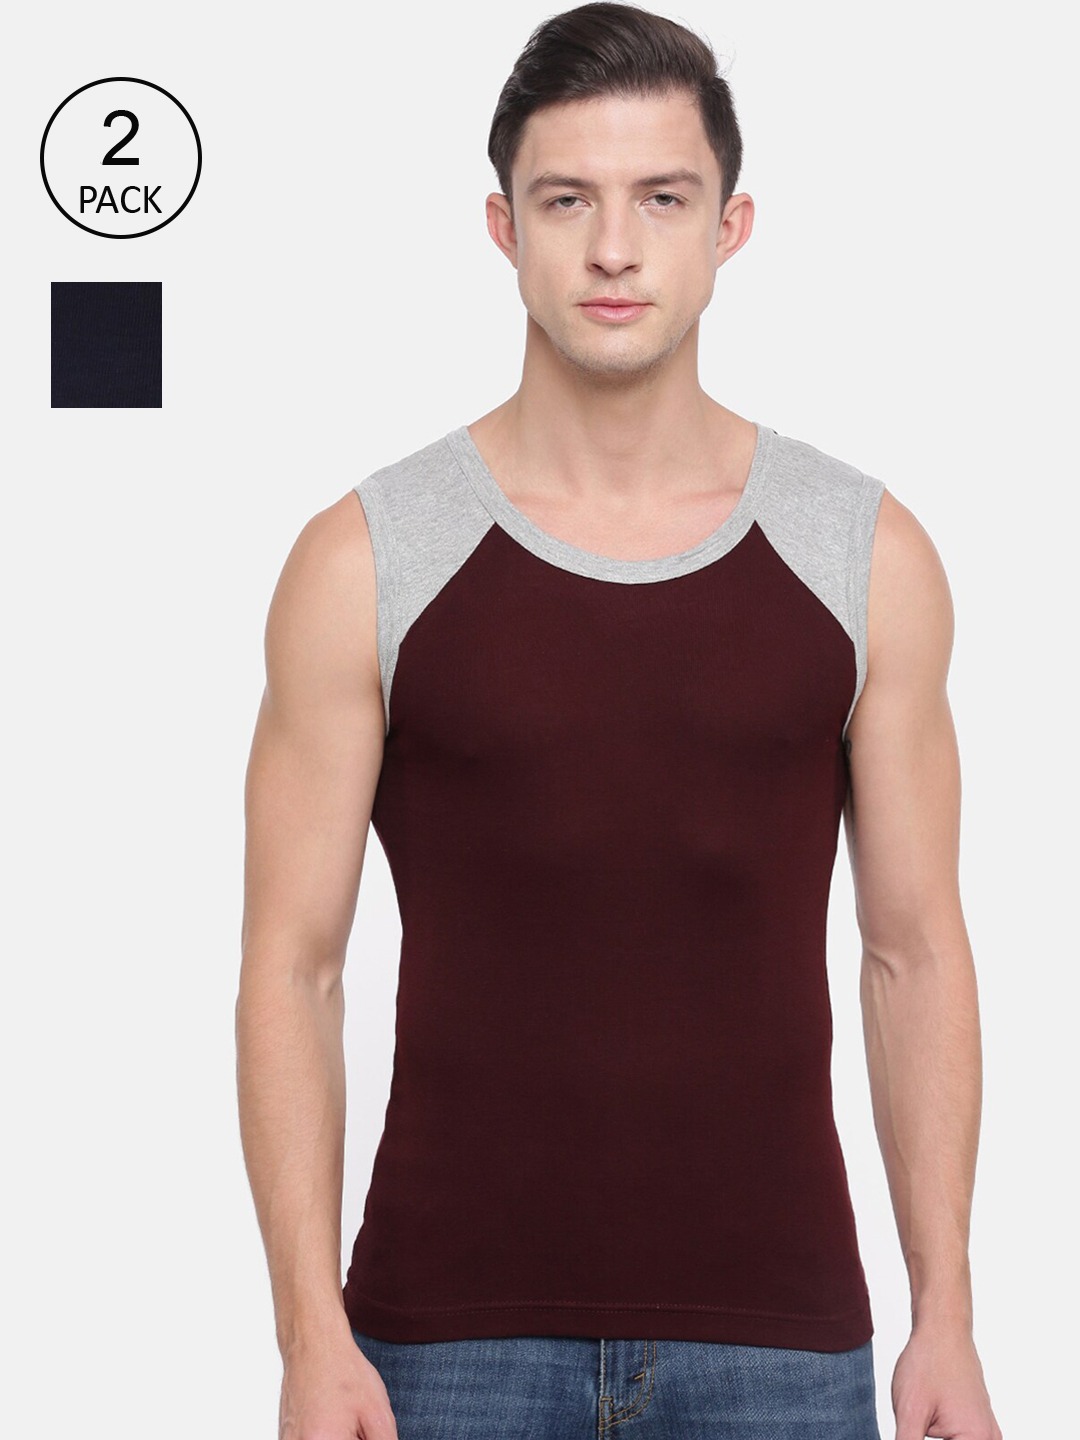 Clothing Innerwear Vests | Genx Men Assorted Pack of 2 Colourblocked Cotton Gym Vests - PN45089